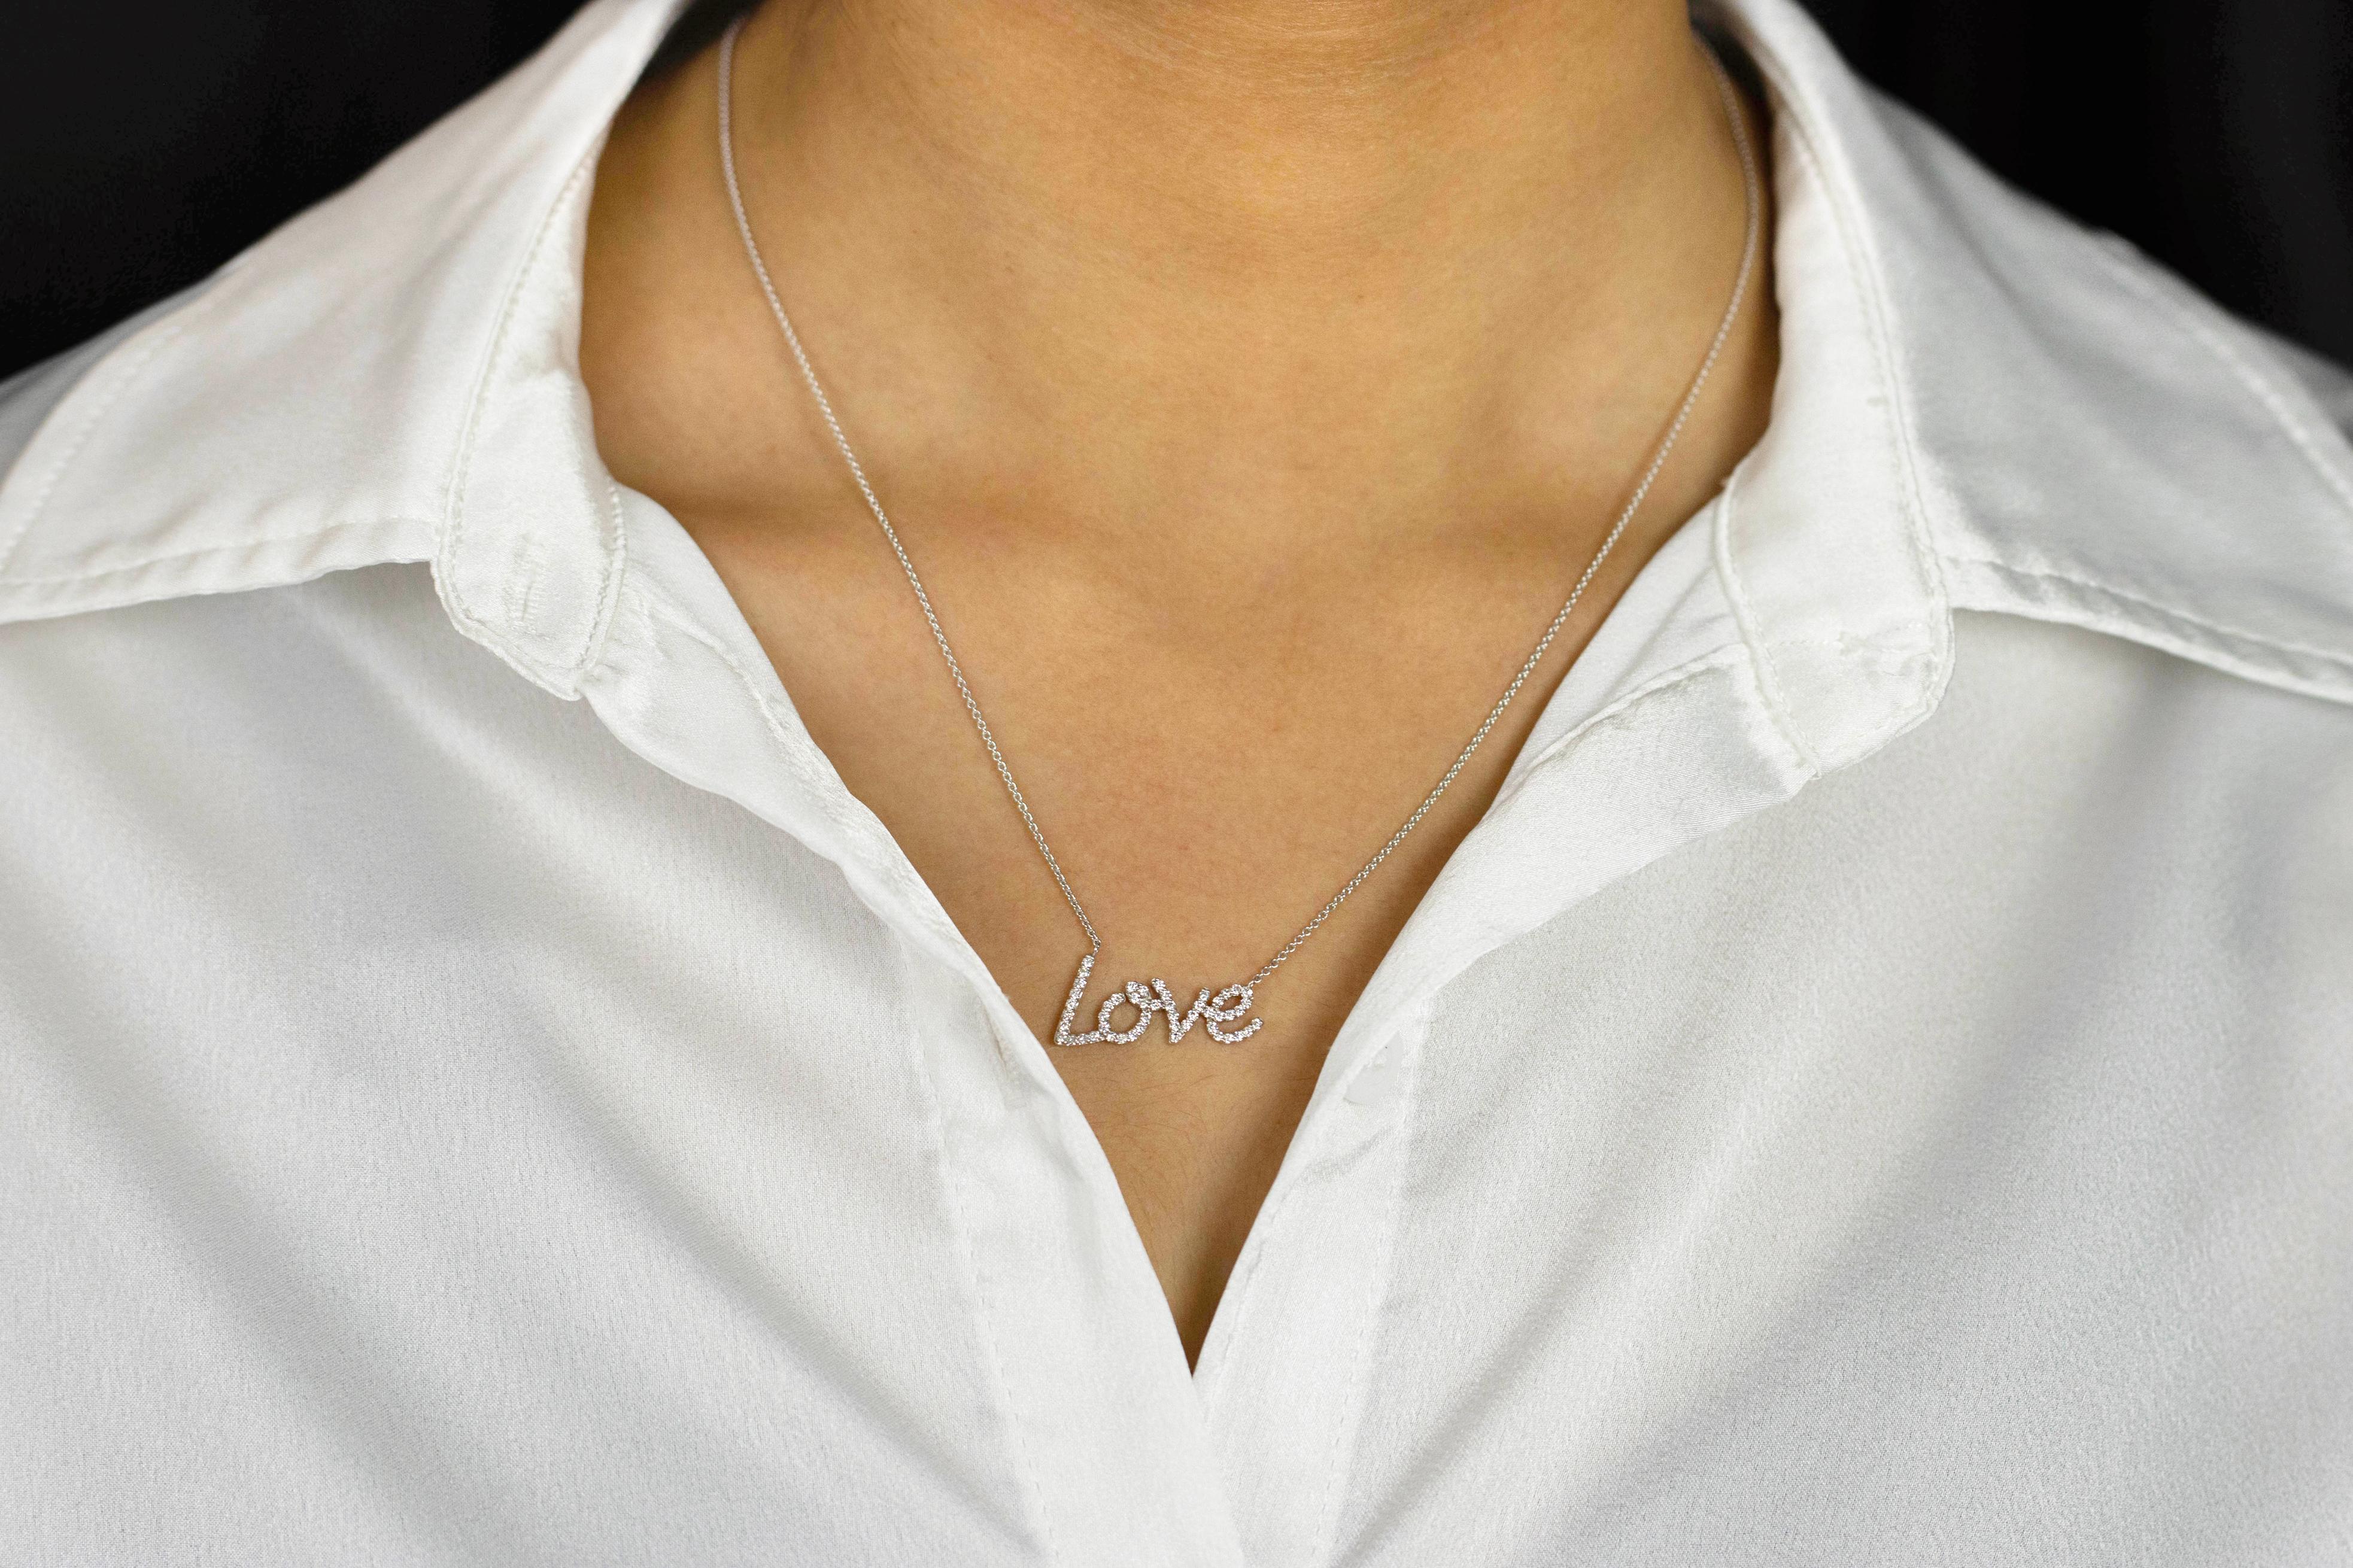 This fashionable and versatile pendant necklace showcasing an 18K white gold 